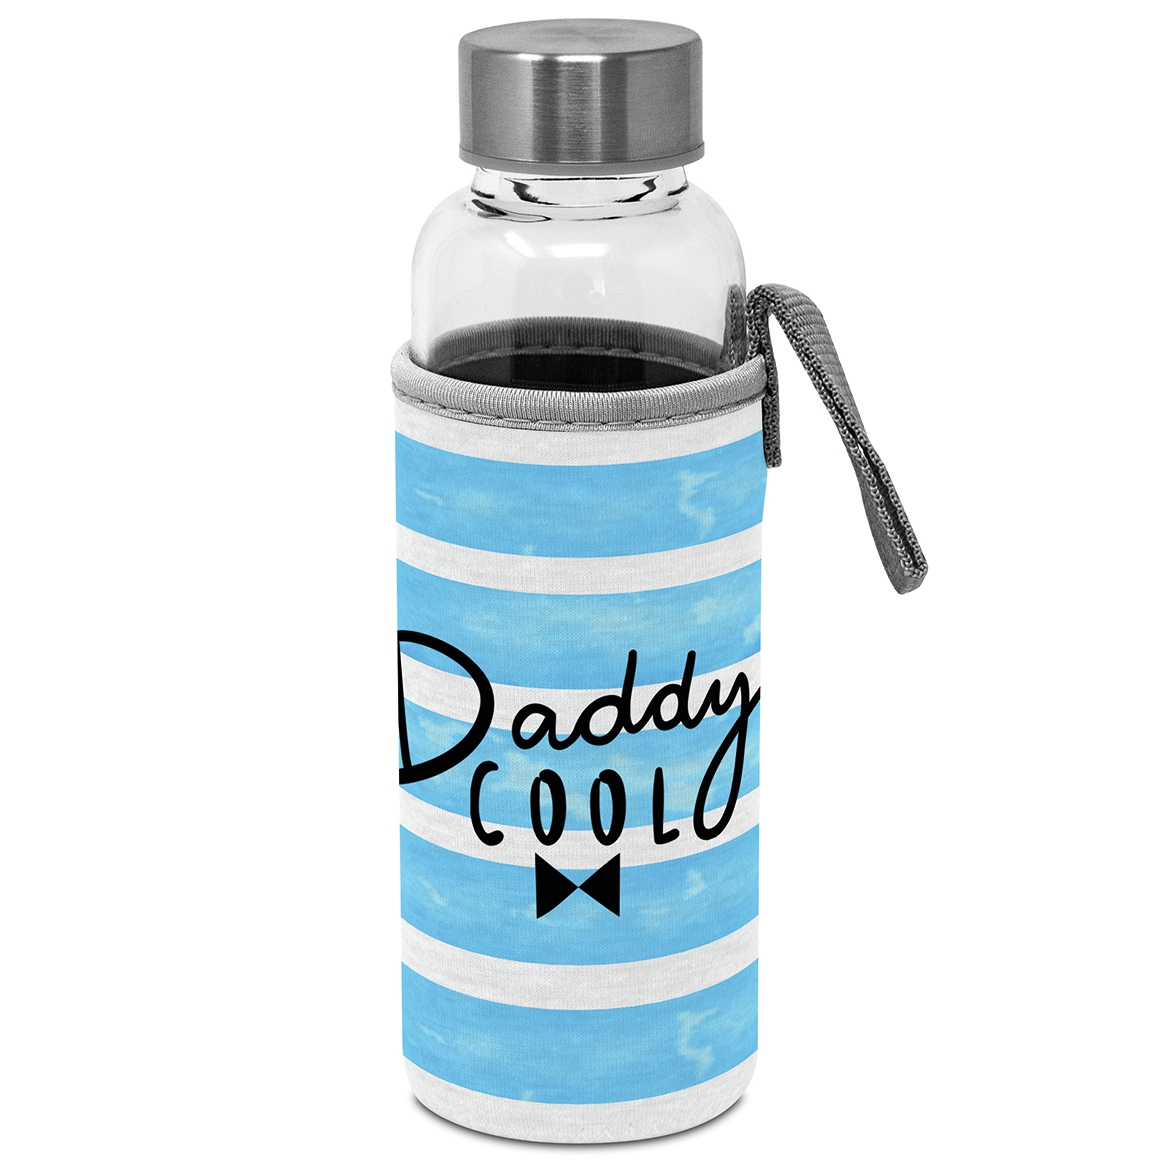 Wiadomość w butelce - Glass Bottle with protection sleeve Daddy Cool